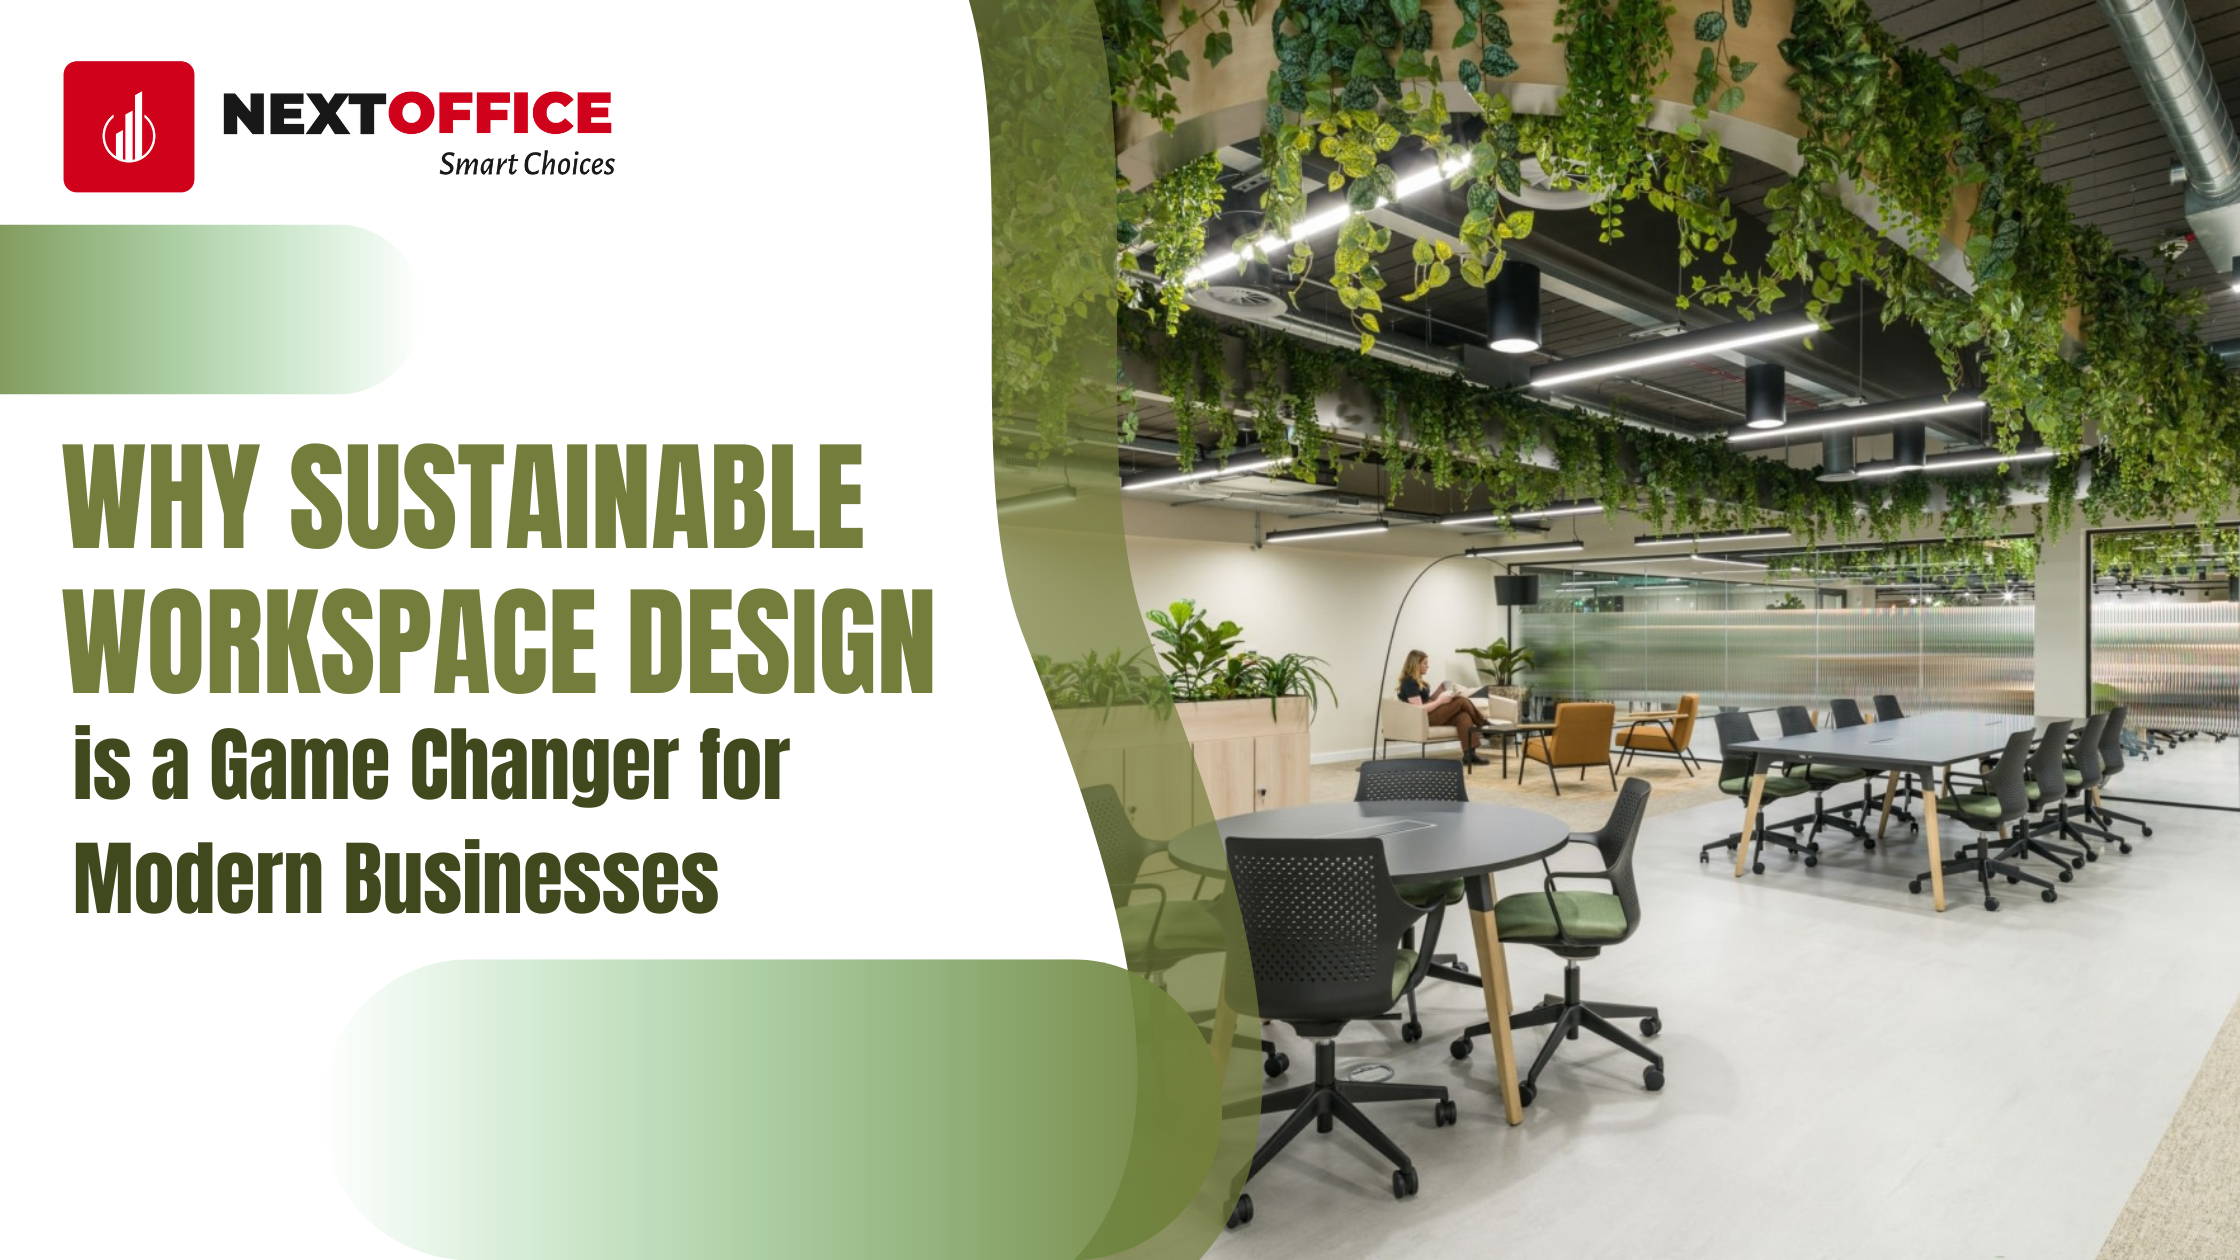 Why Sustainable Workspace Design is a Game Changer for Modern Businesses